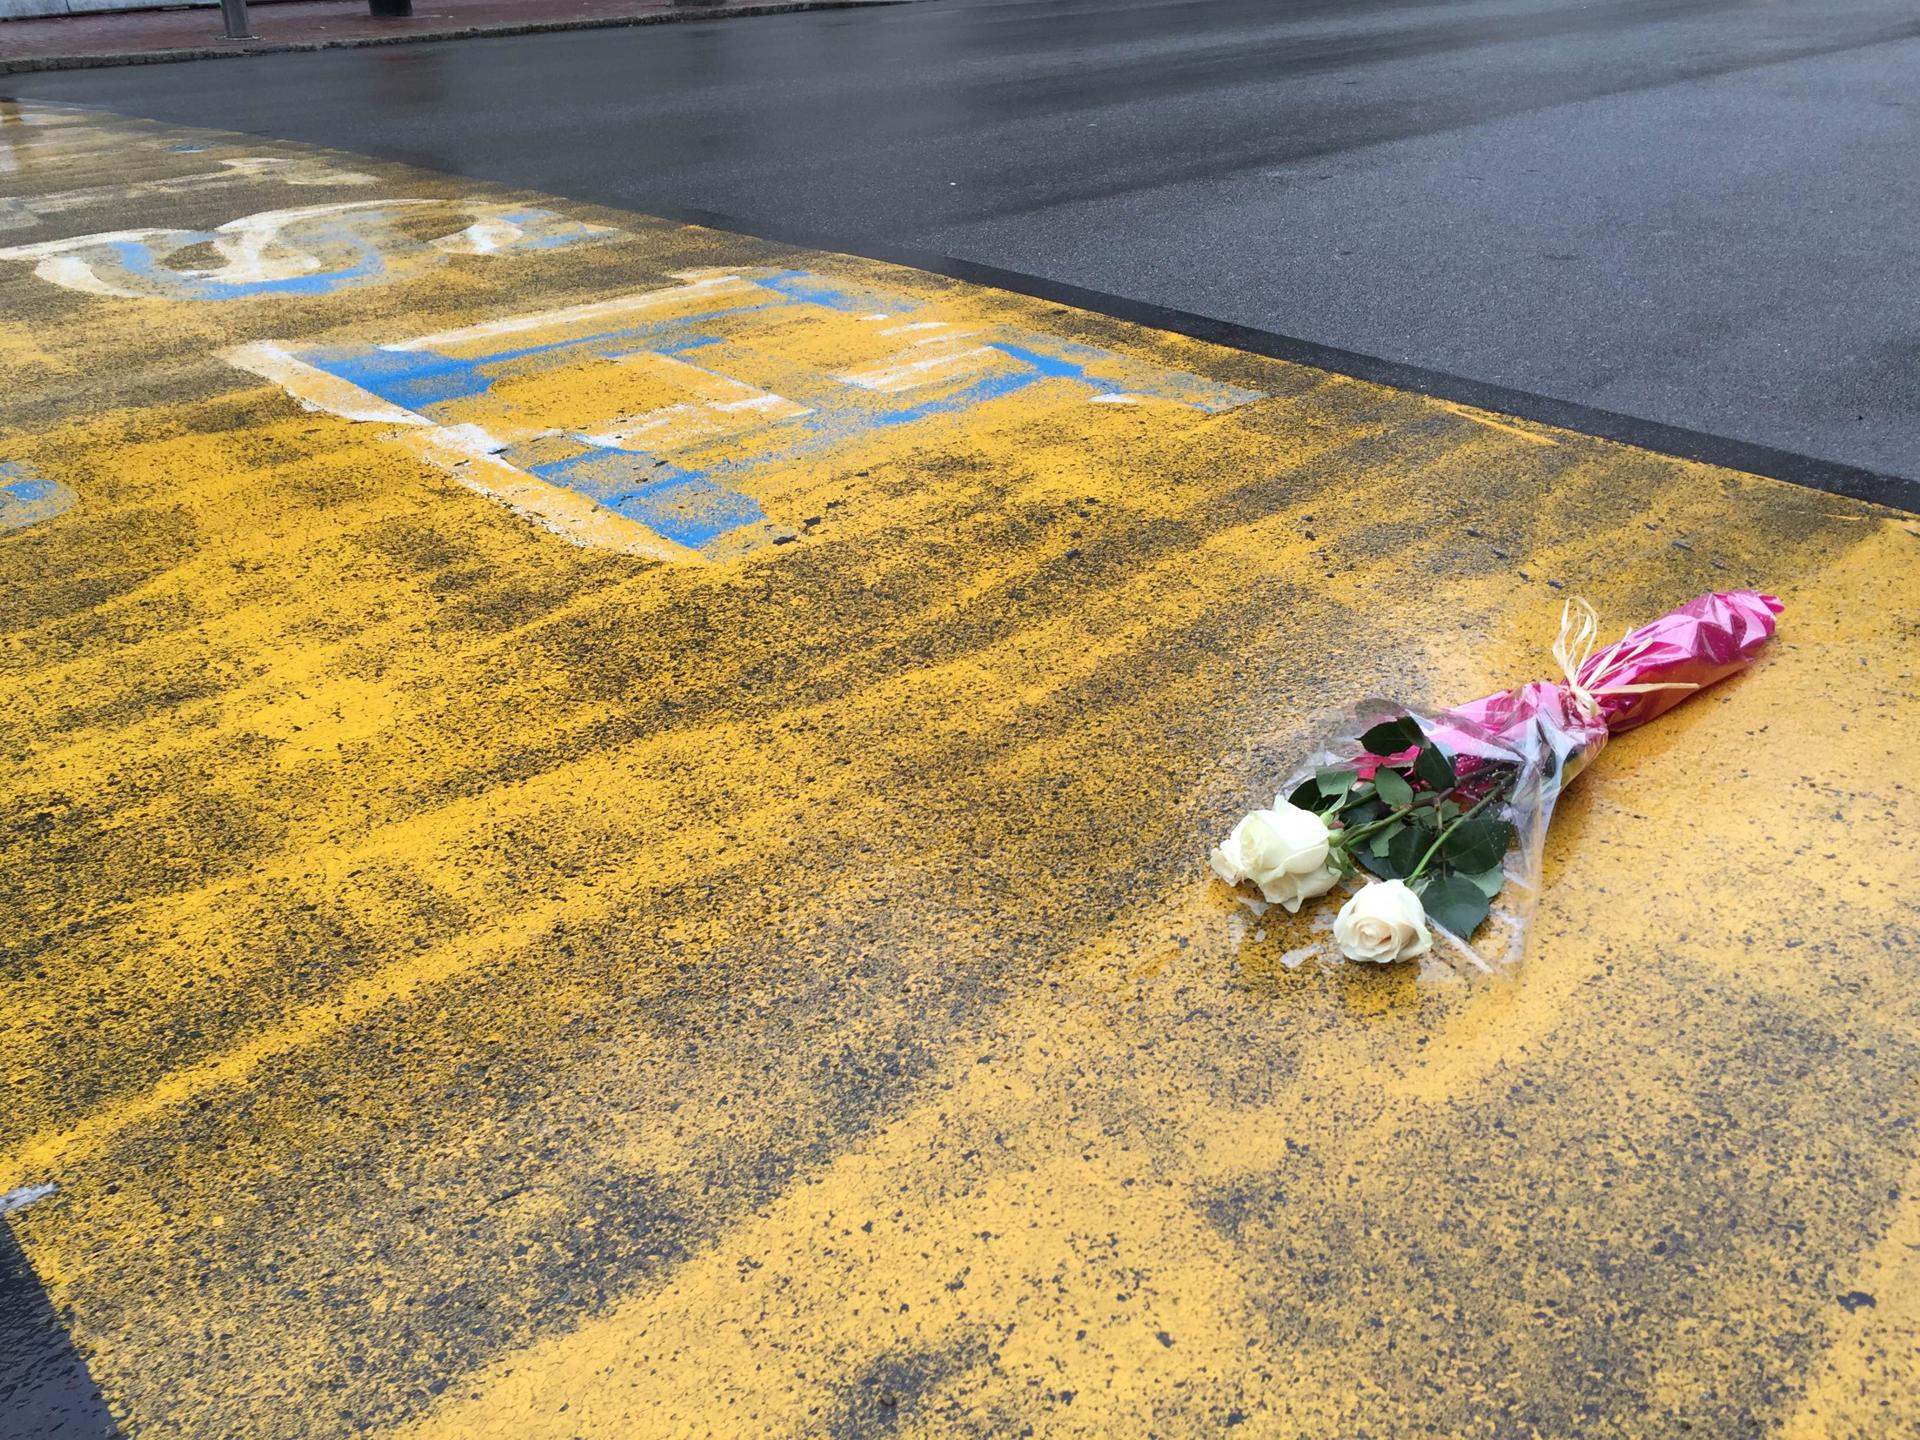 Roses left at bomb site after guilty verdict. Photo Boston Globe